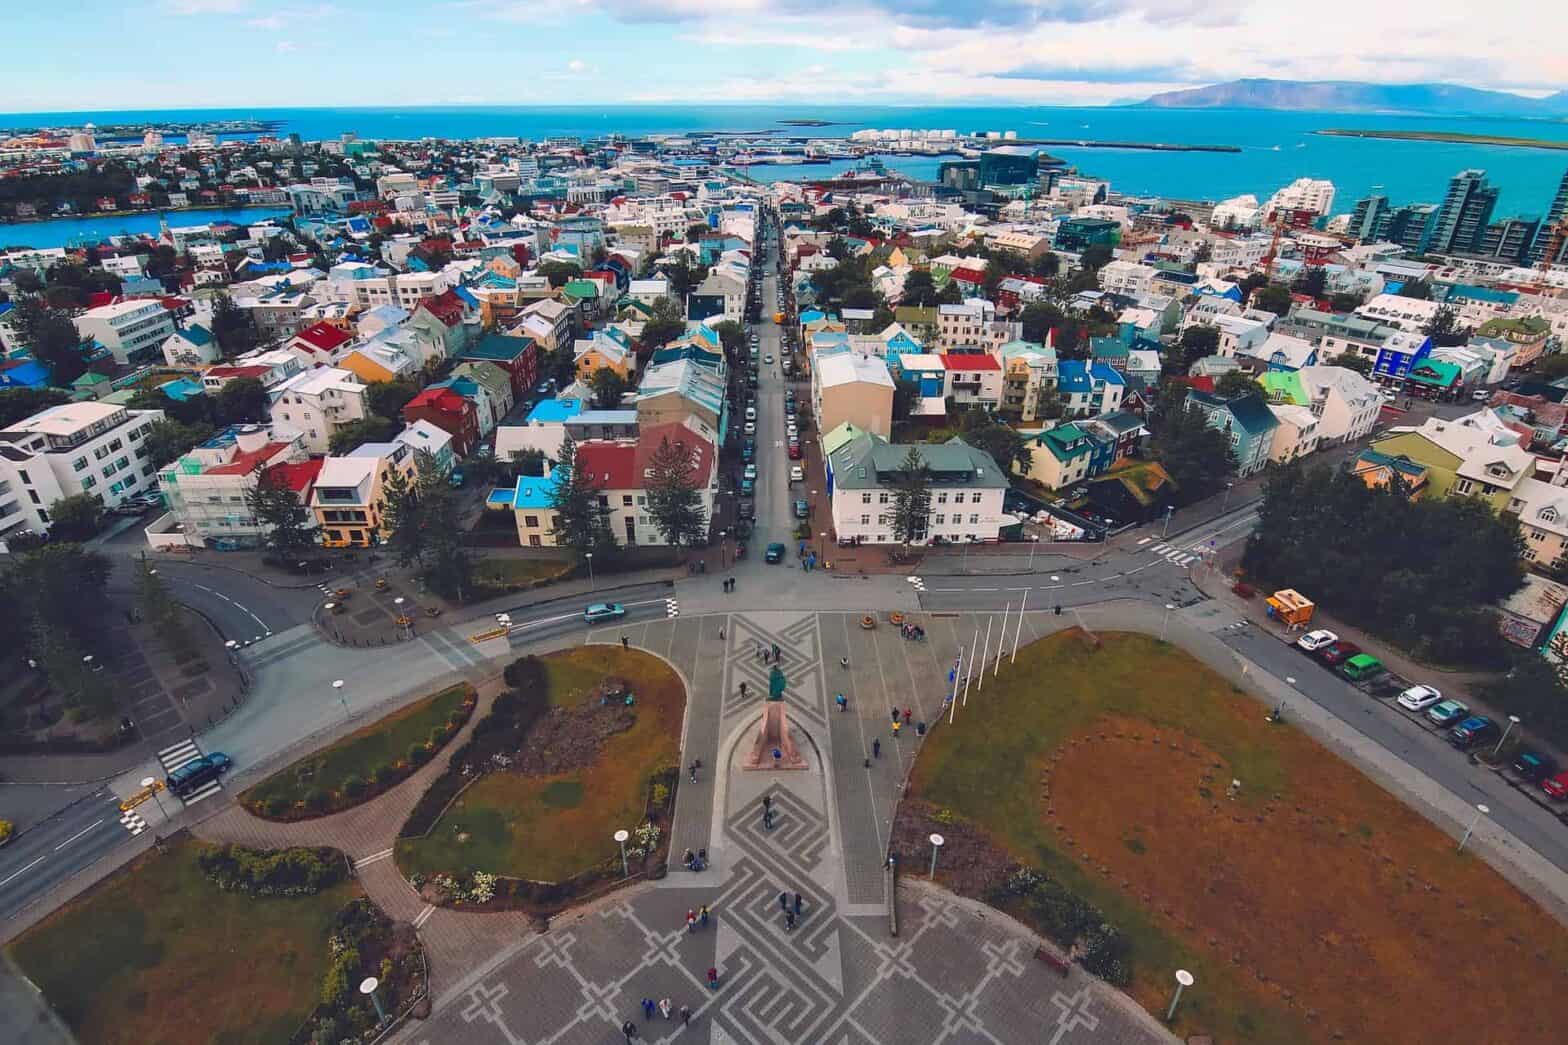 7 Remarkable Things You Need To Do In Reykjavik